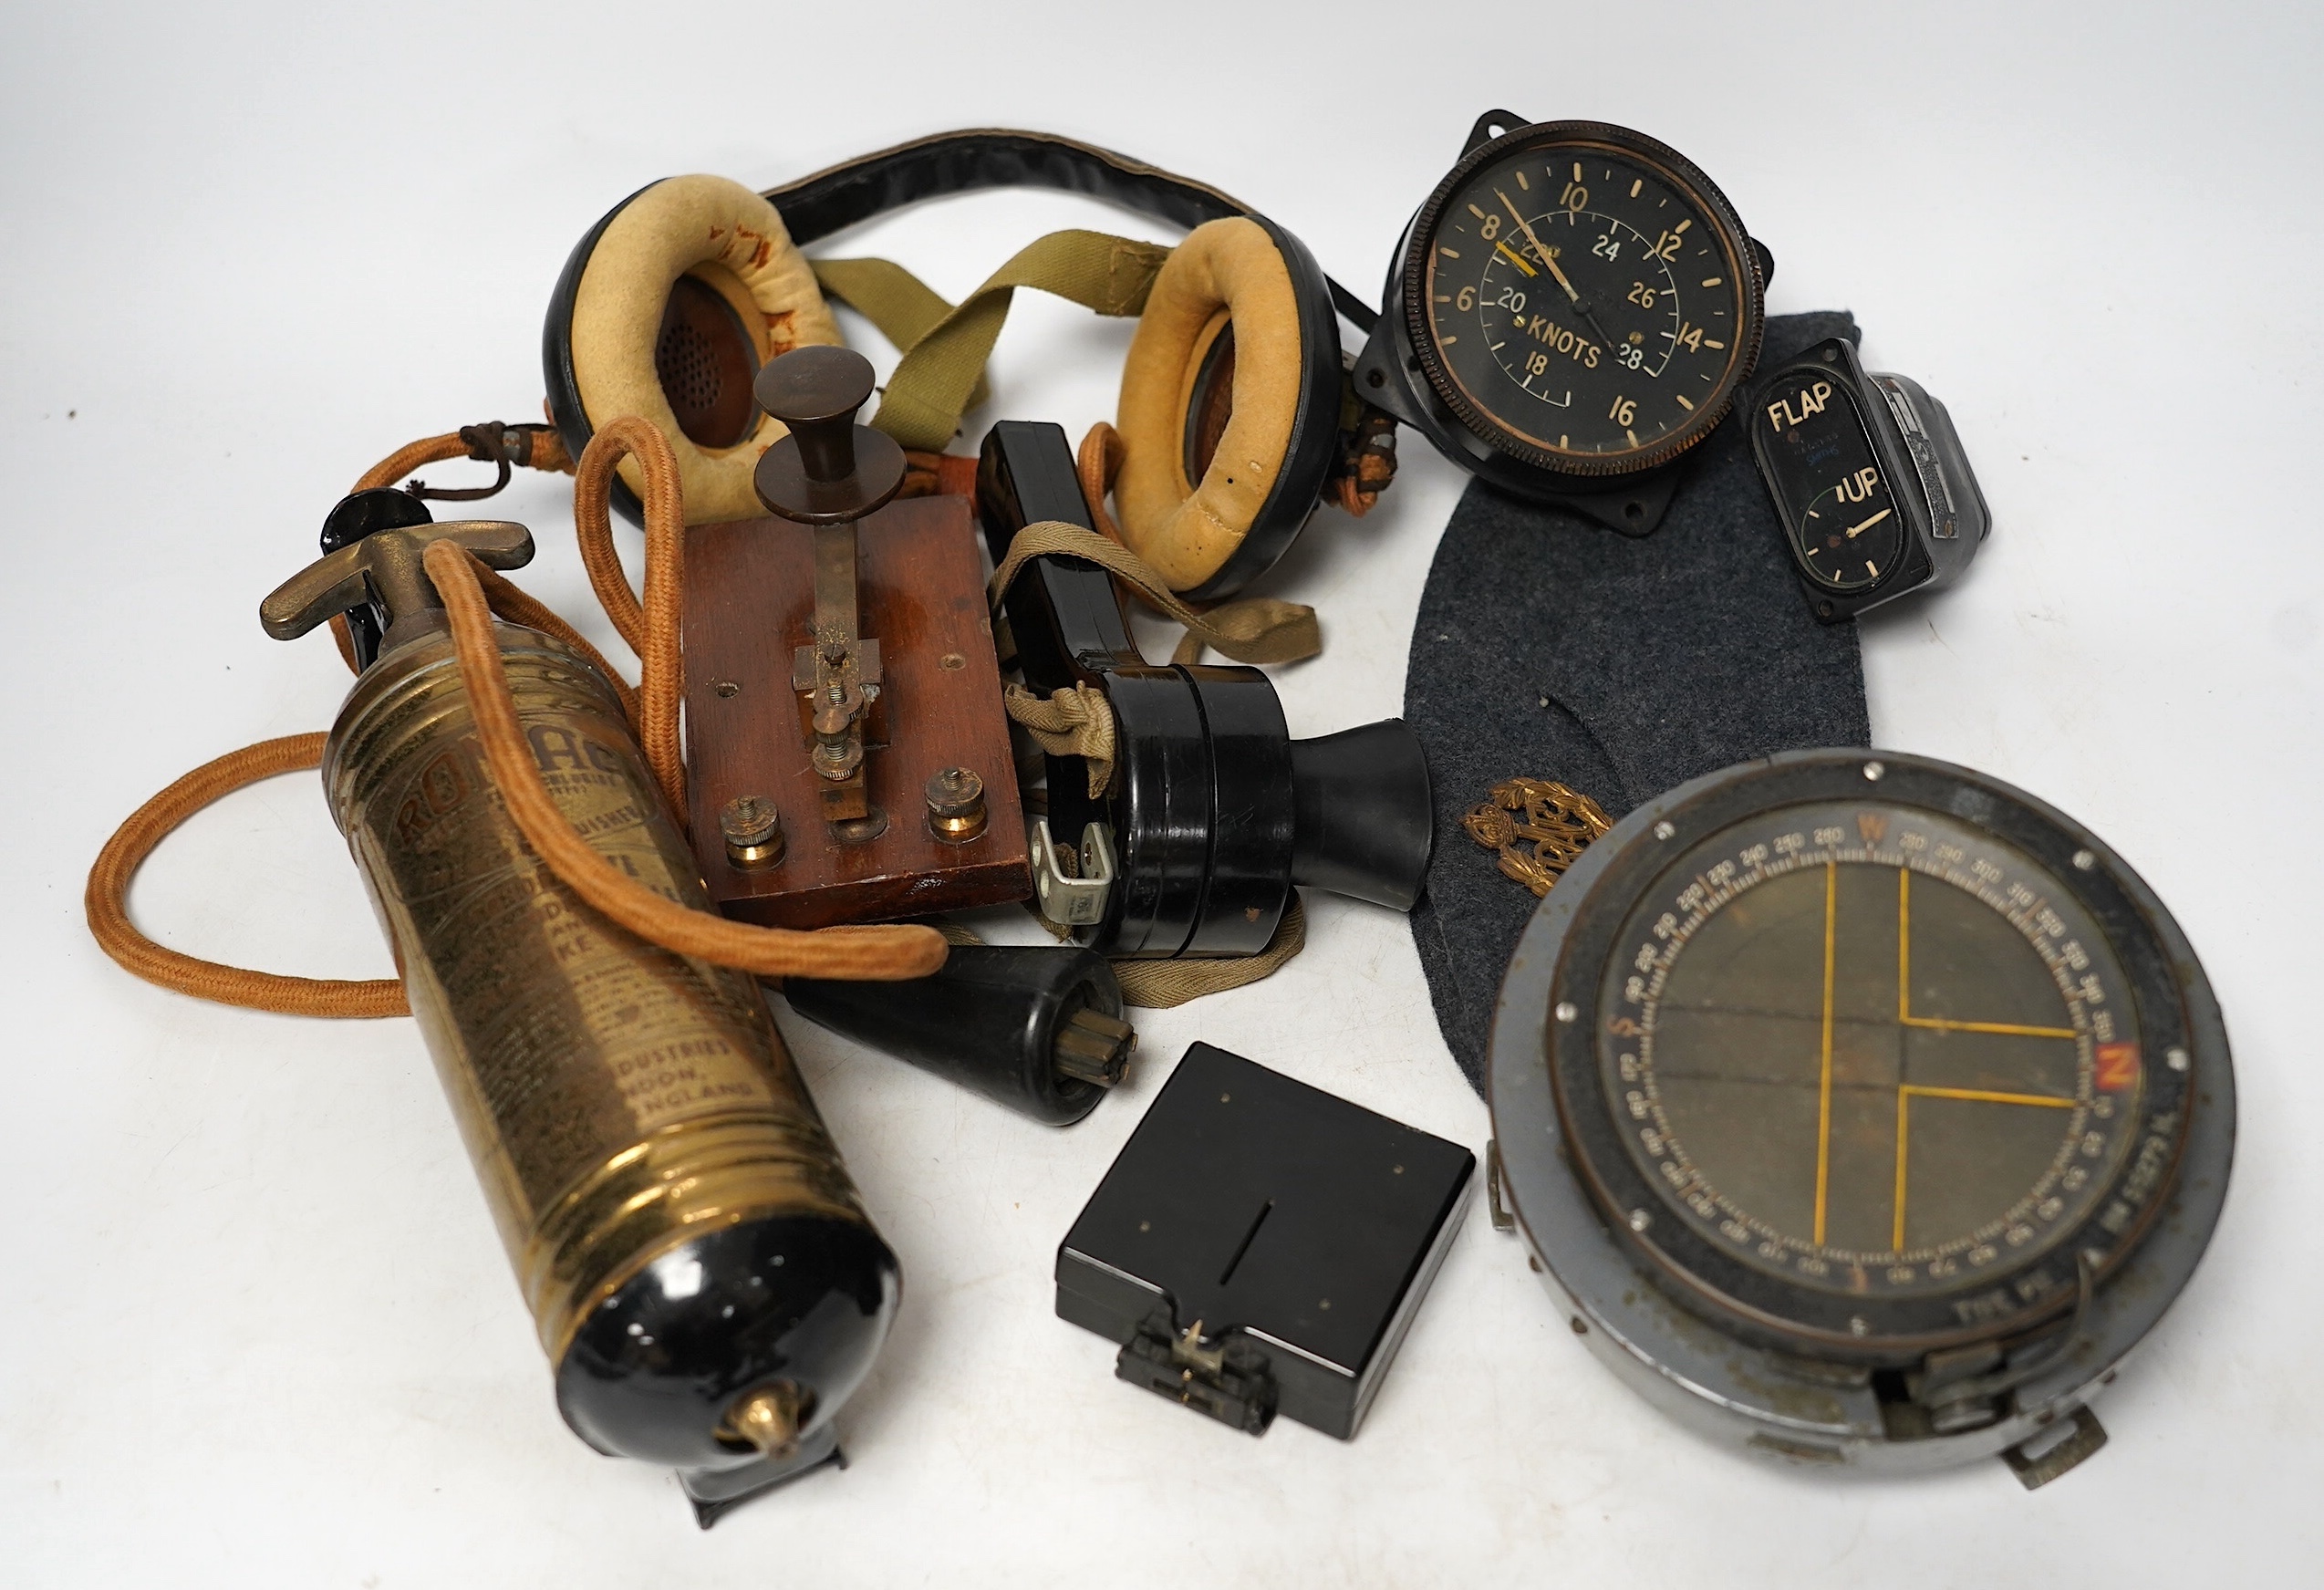 A collection of various WWII military and RAF related items including; an aviation headset, microphone, compass, odometer, morse code tapper, RAF cap, etc. Condition - poor to fair